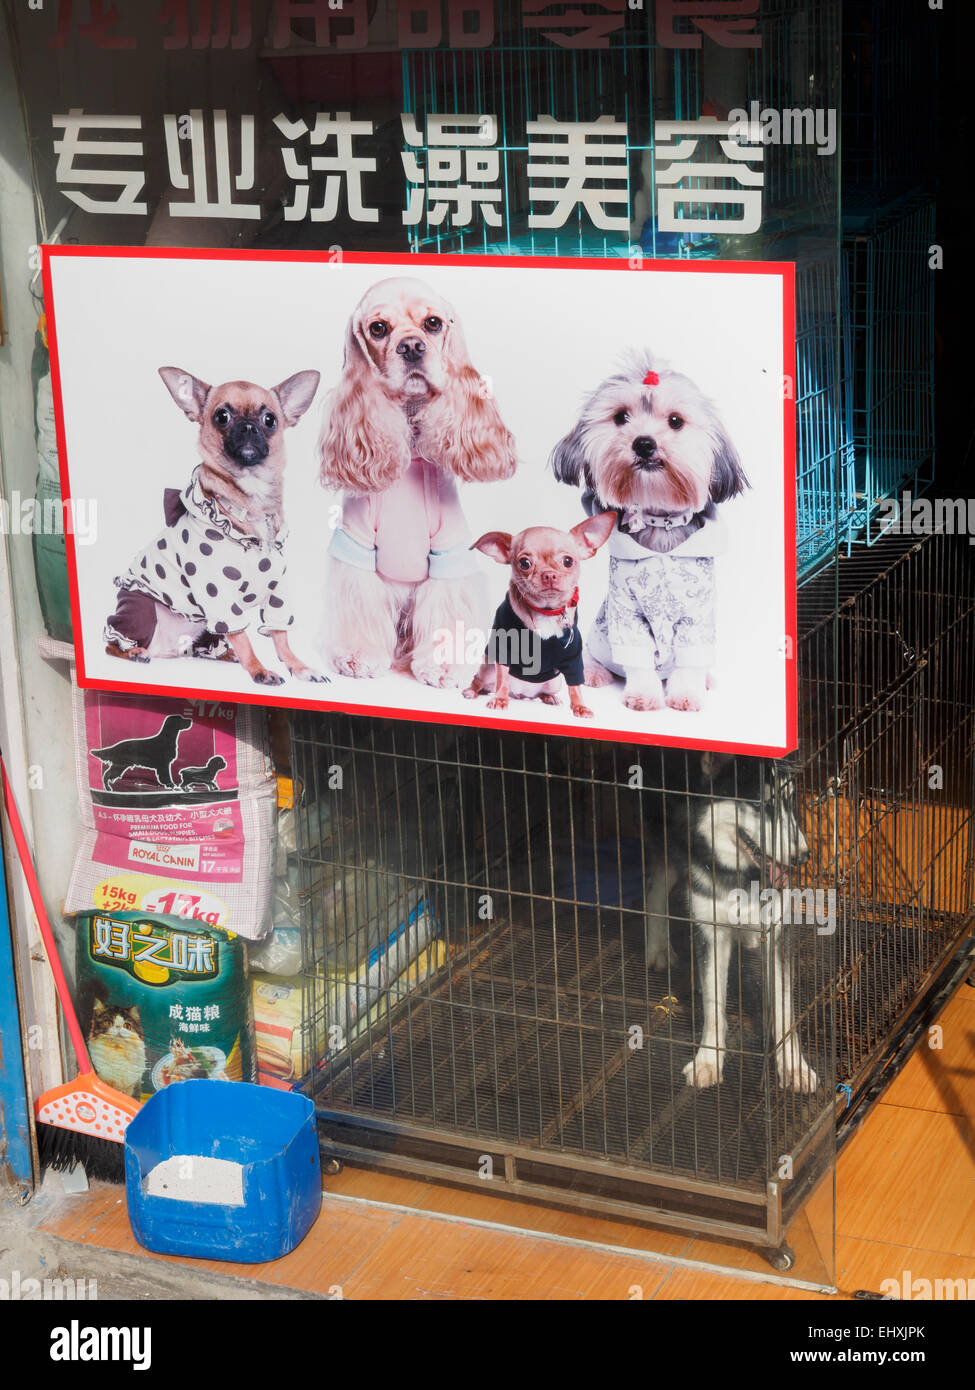 Pet shop selling dogs in Shanghai, China Stock Photo